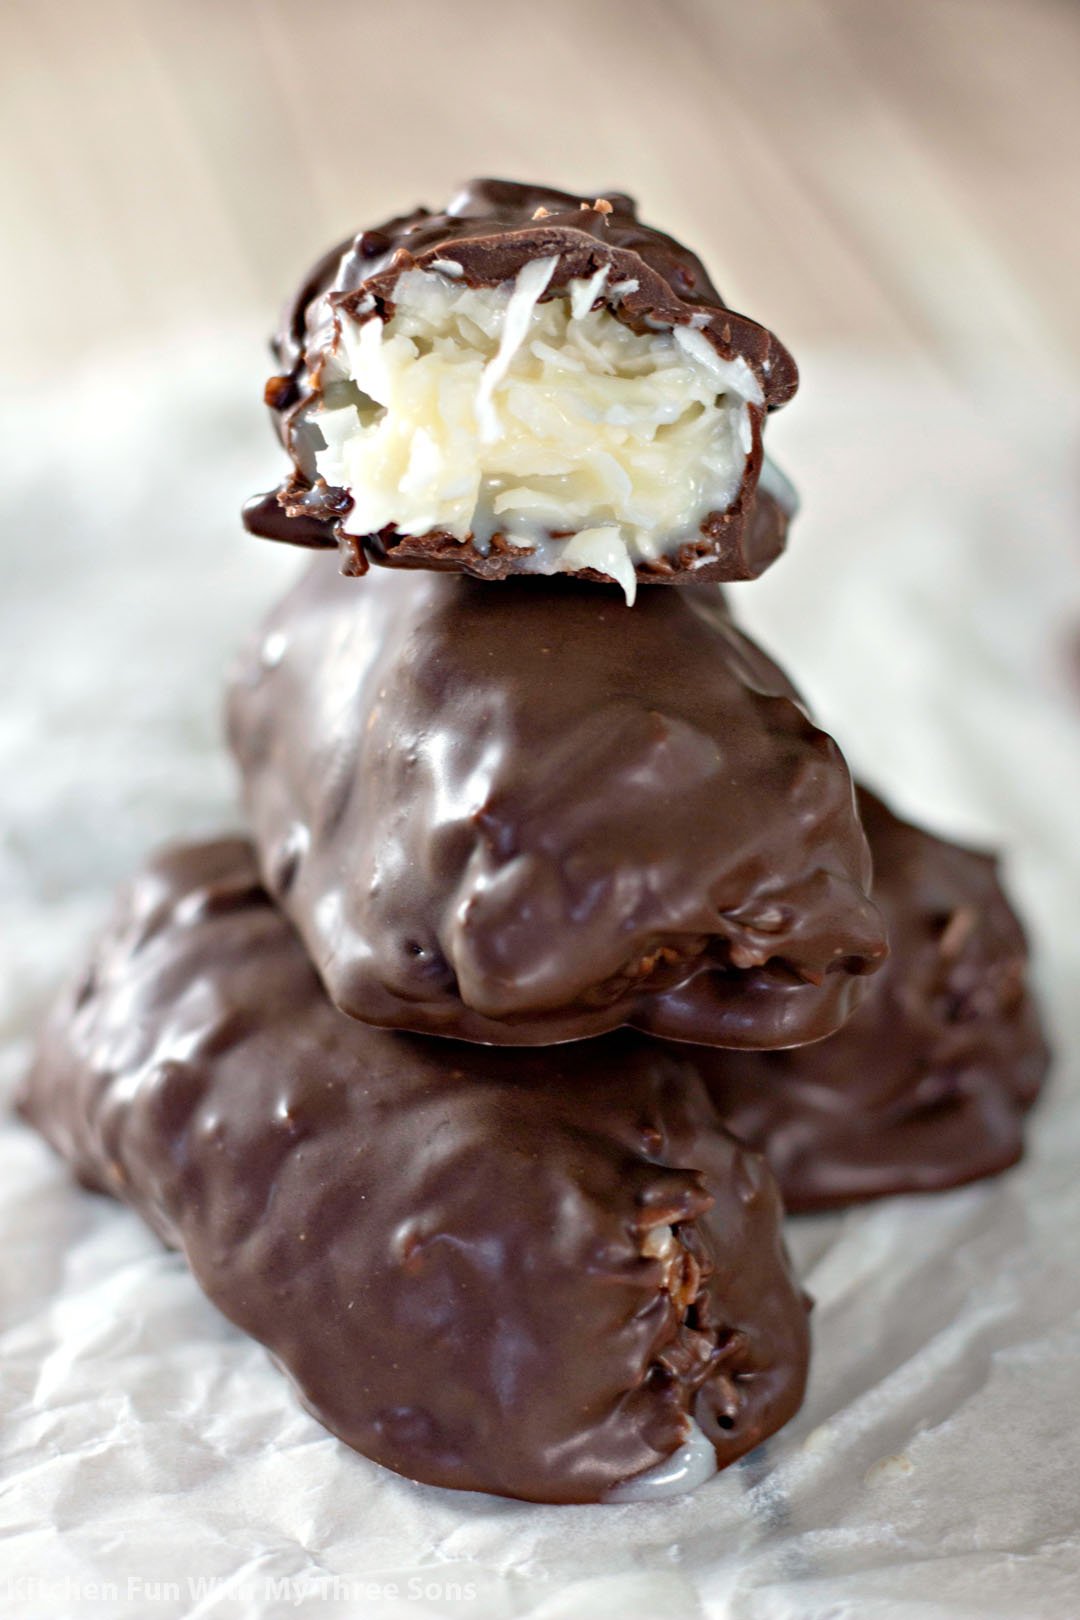 Copycat movie theater candy: 3-ingredient Mounds bar recipe from Kitchen Fun with My 3 Sons